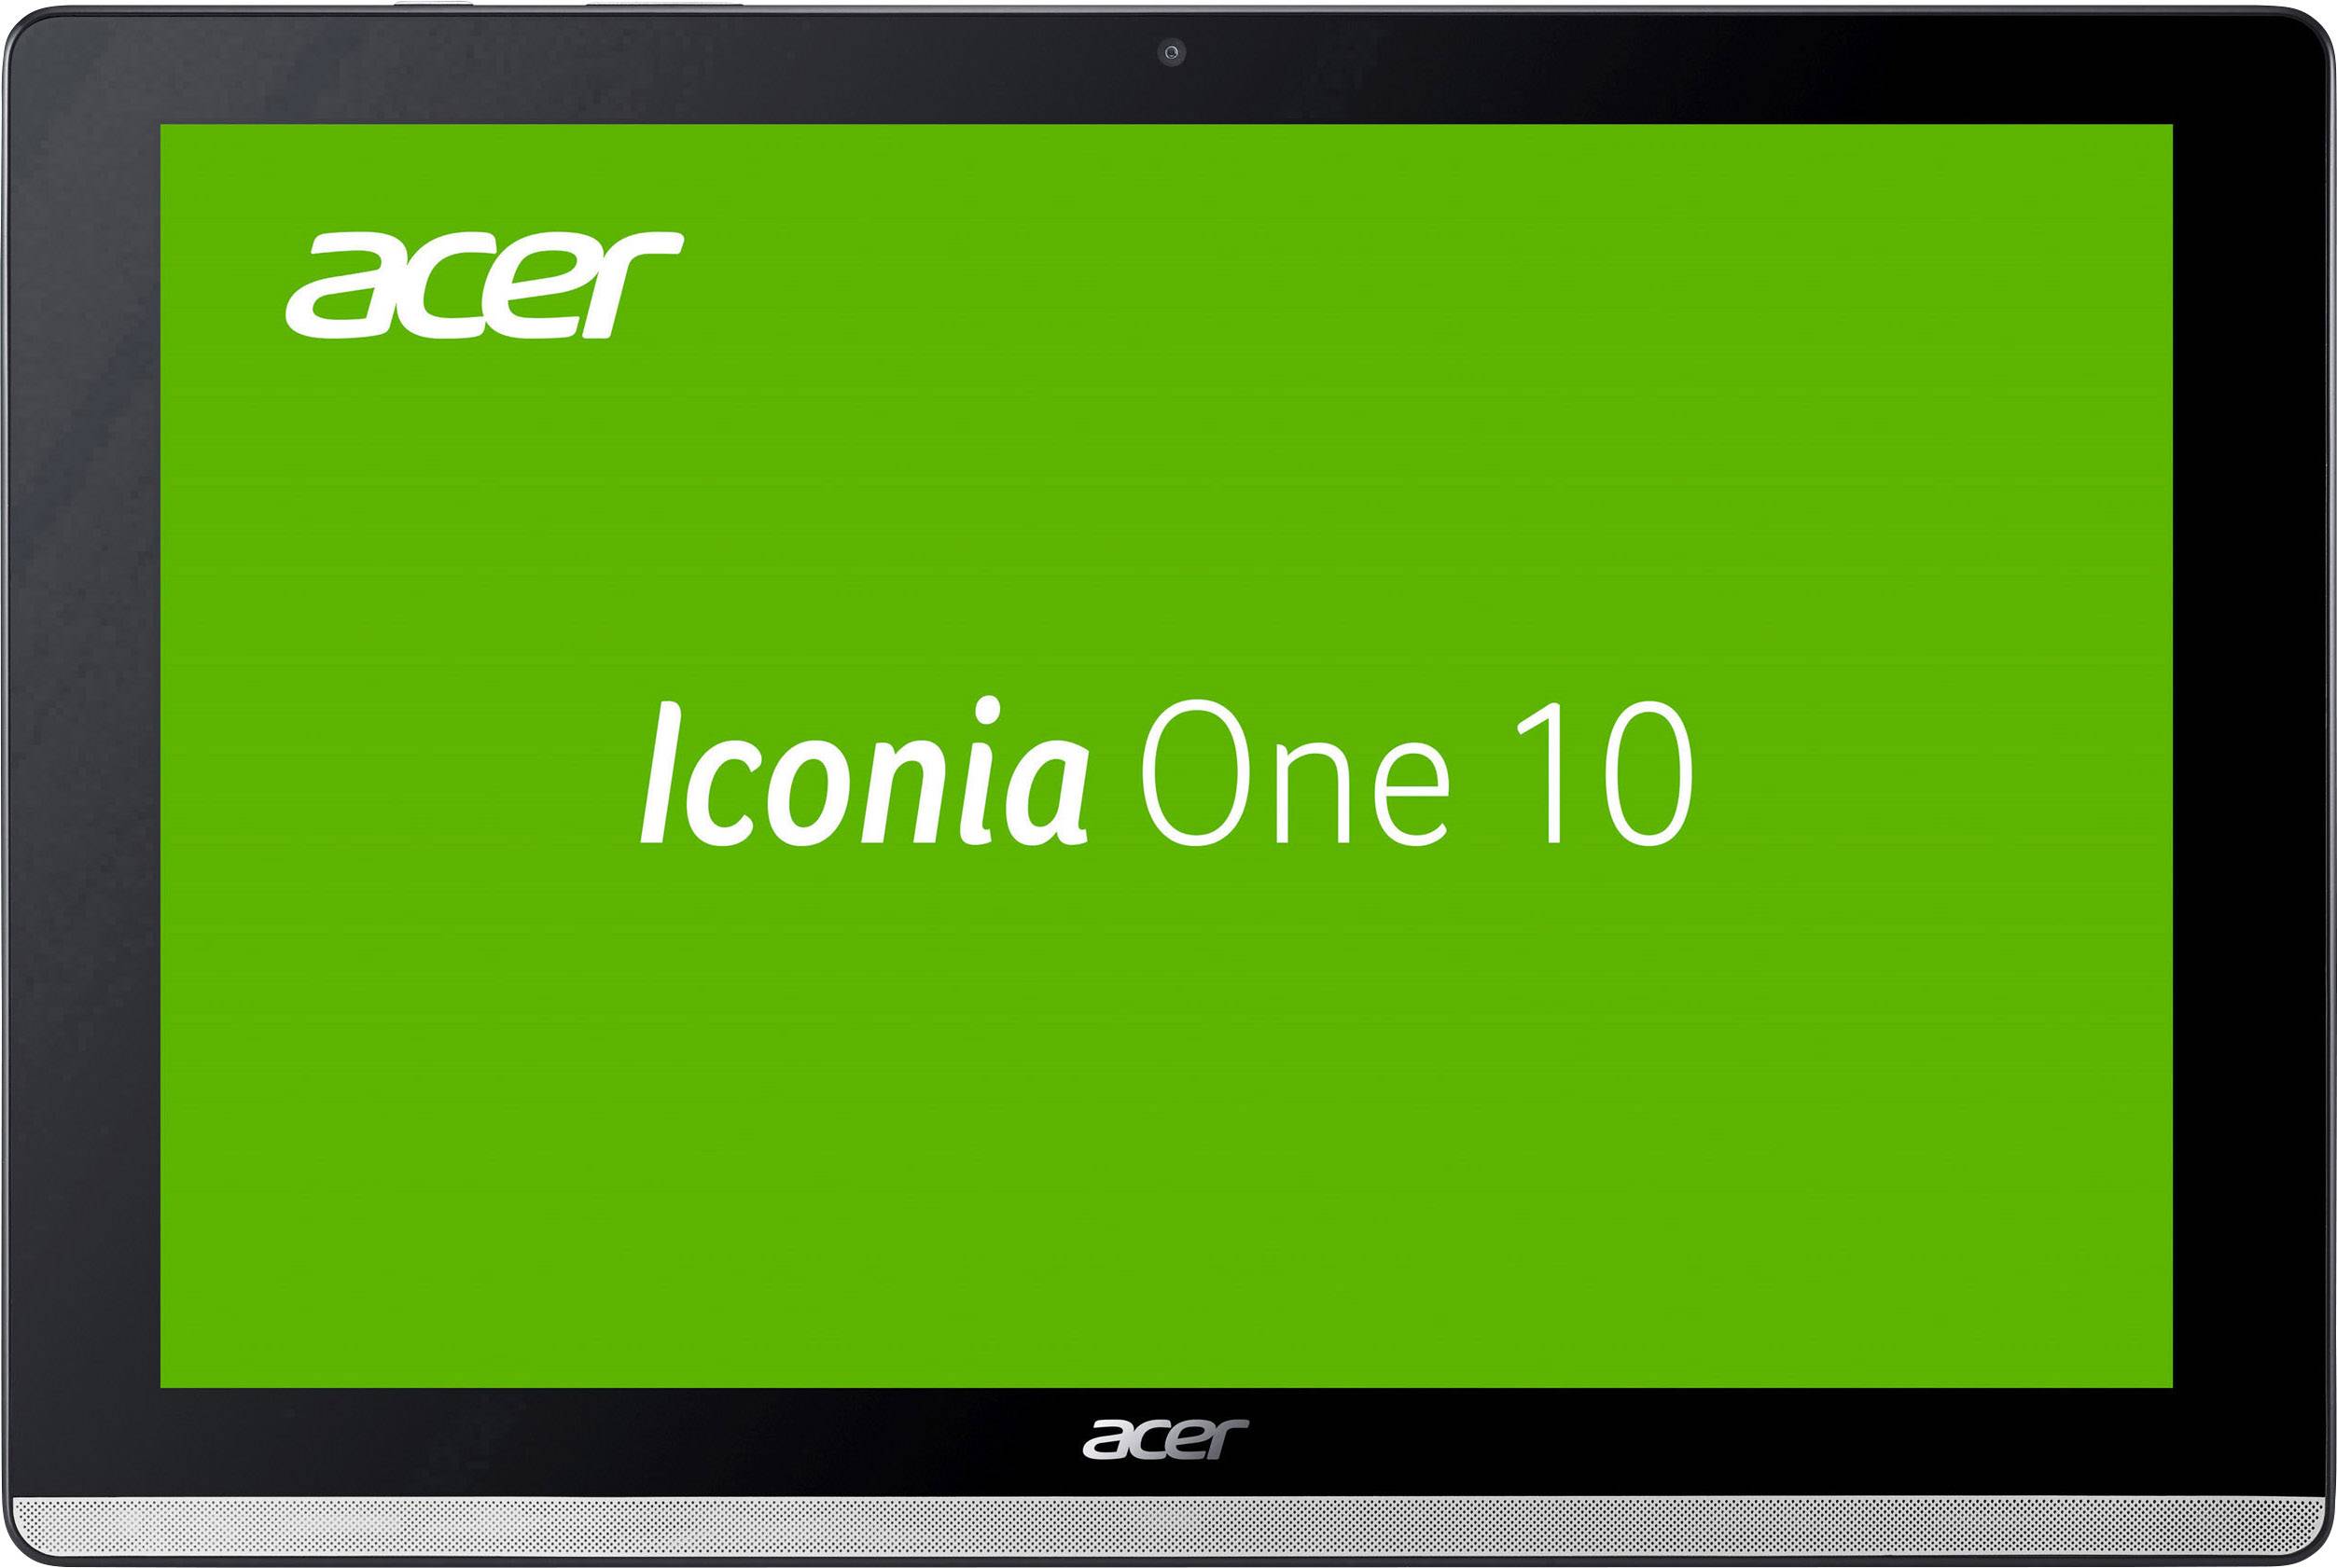 Acer Iconia One 10 B3 WiFi GB Zilver Android-tablet 25.7 cm (10.1 inch) 1.5 GHz MediaTek 8.1 Oreo x 1200 | Conrad.nl